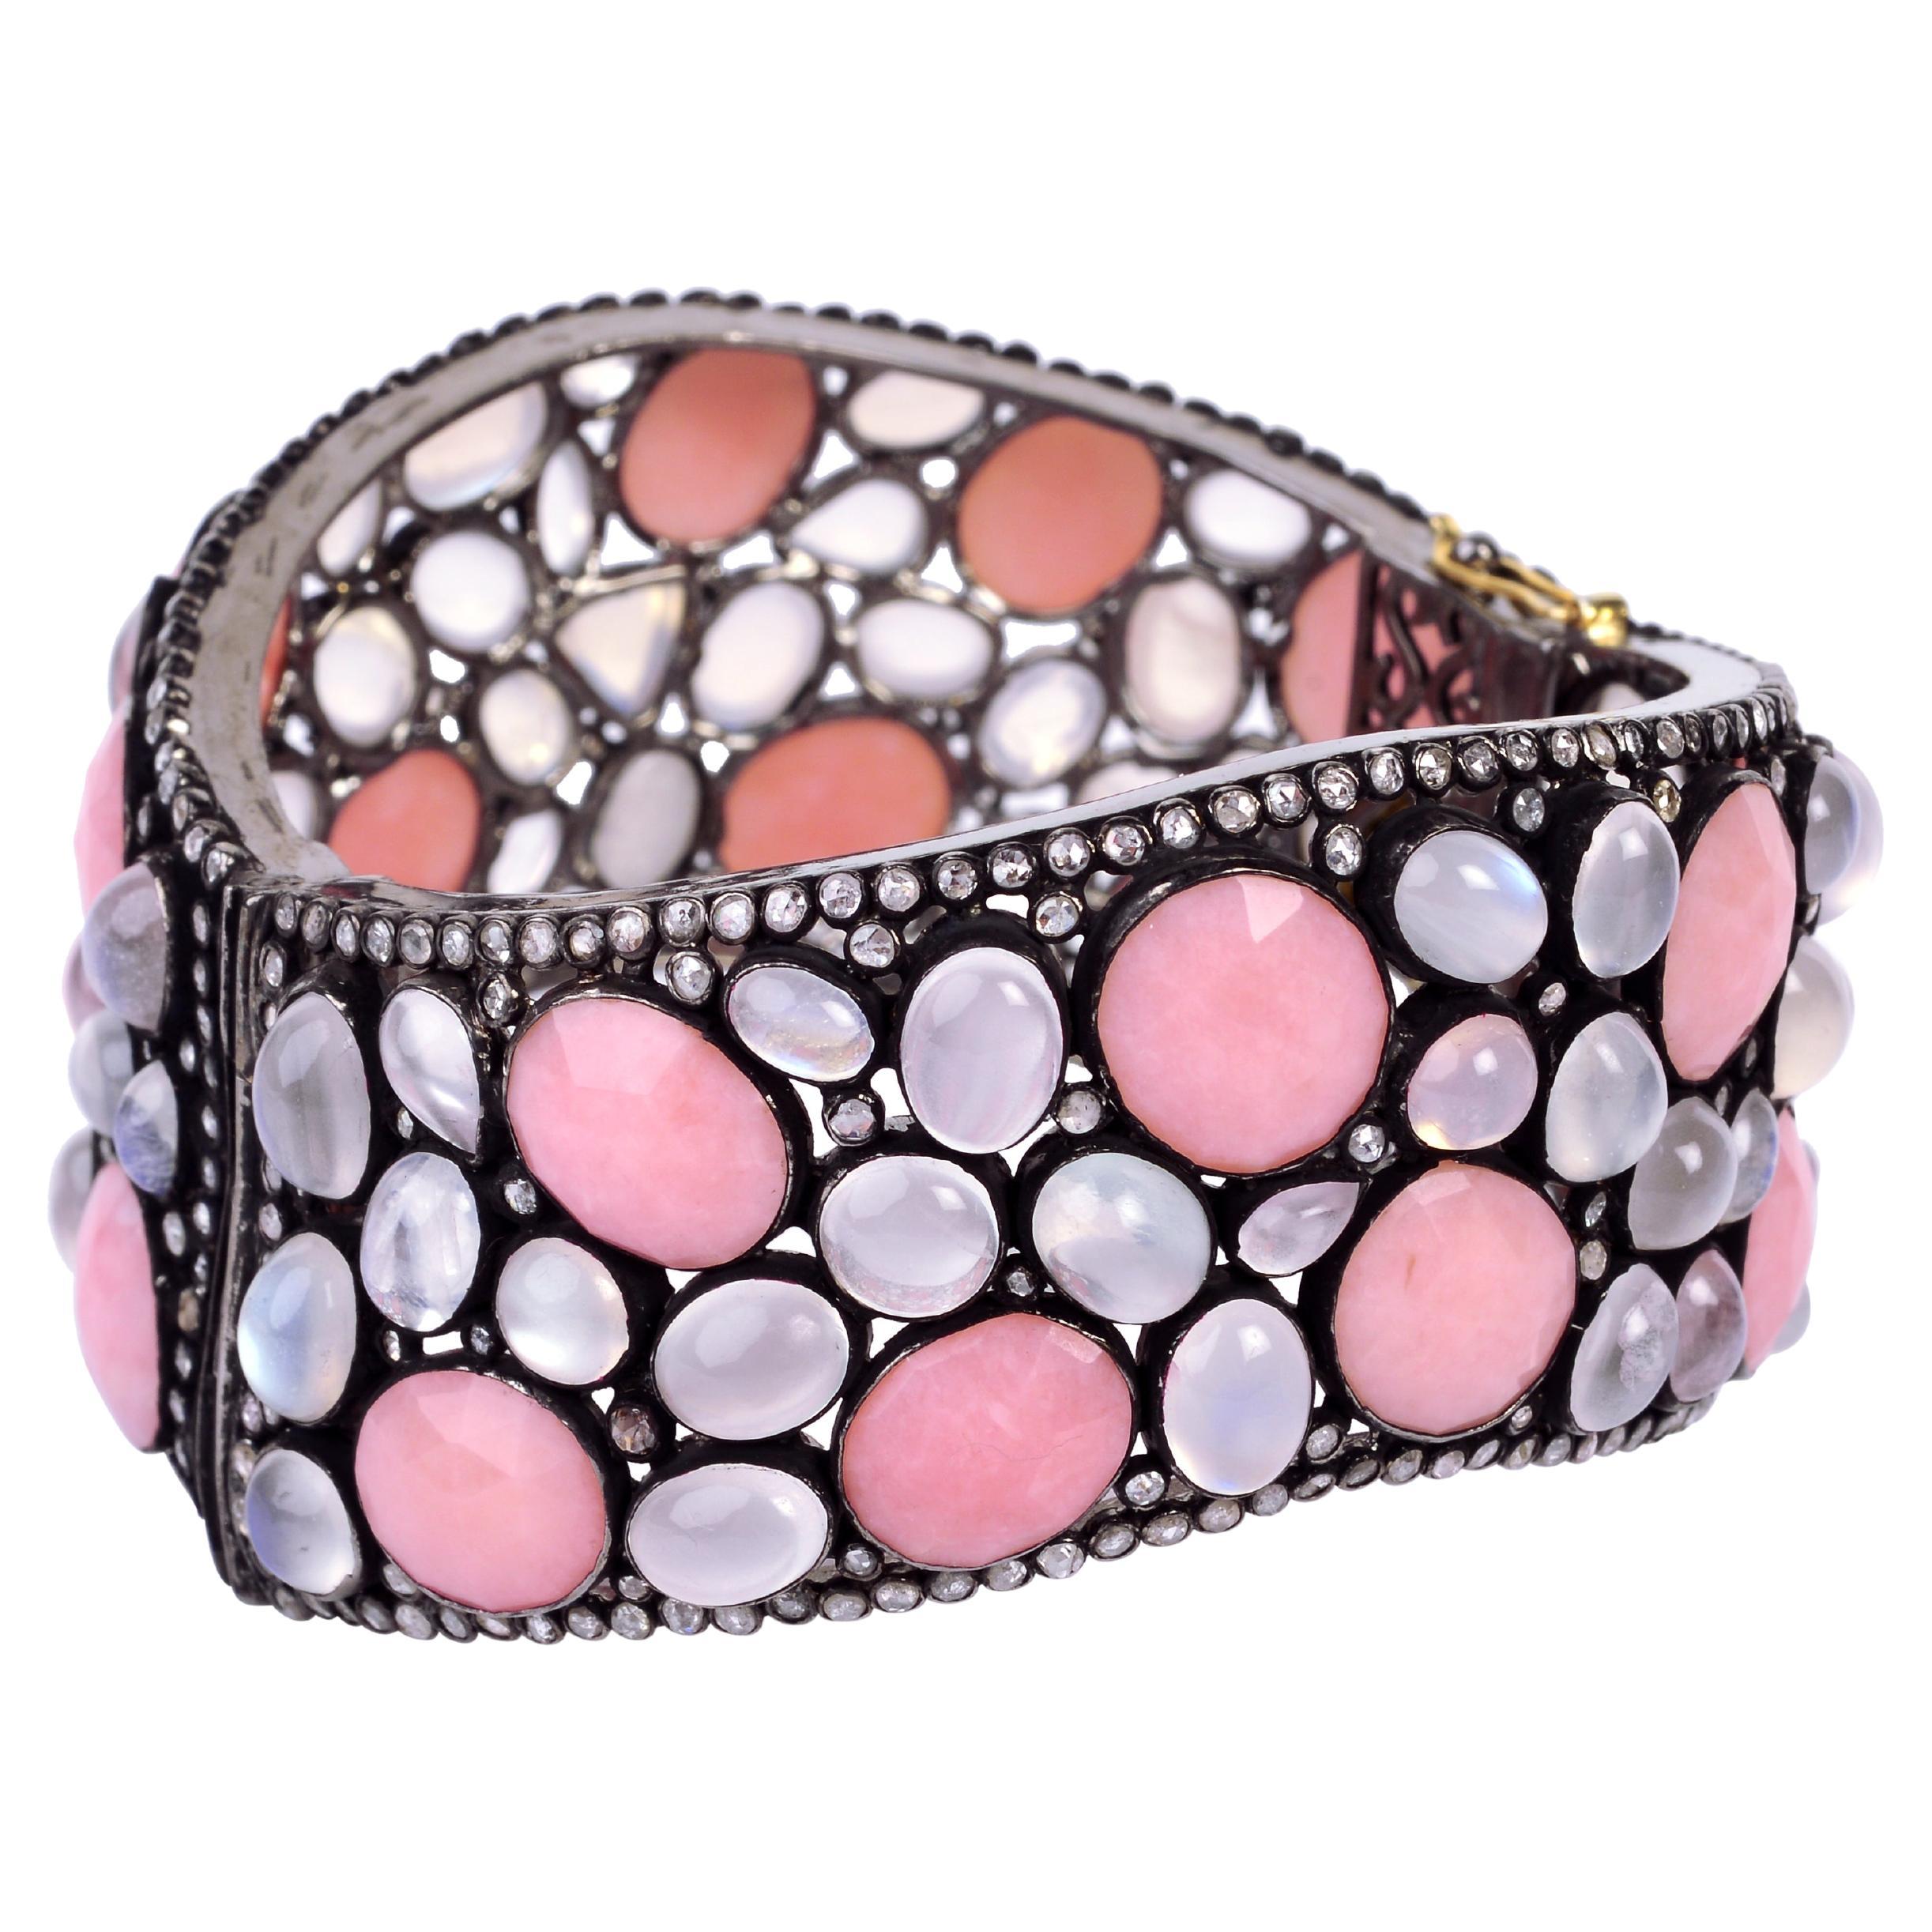 Pink Opal & Moonstone Cuff with Pave Diamonds Made in 14k Gold & Silver